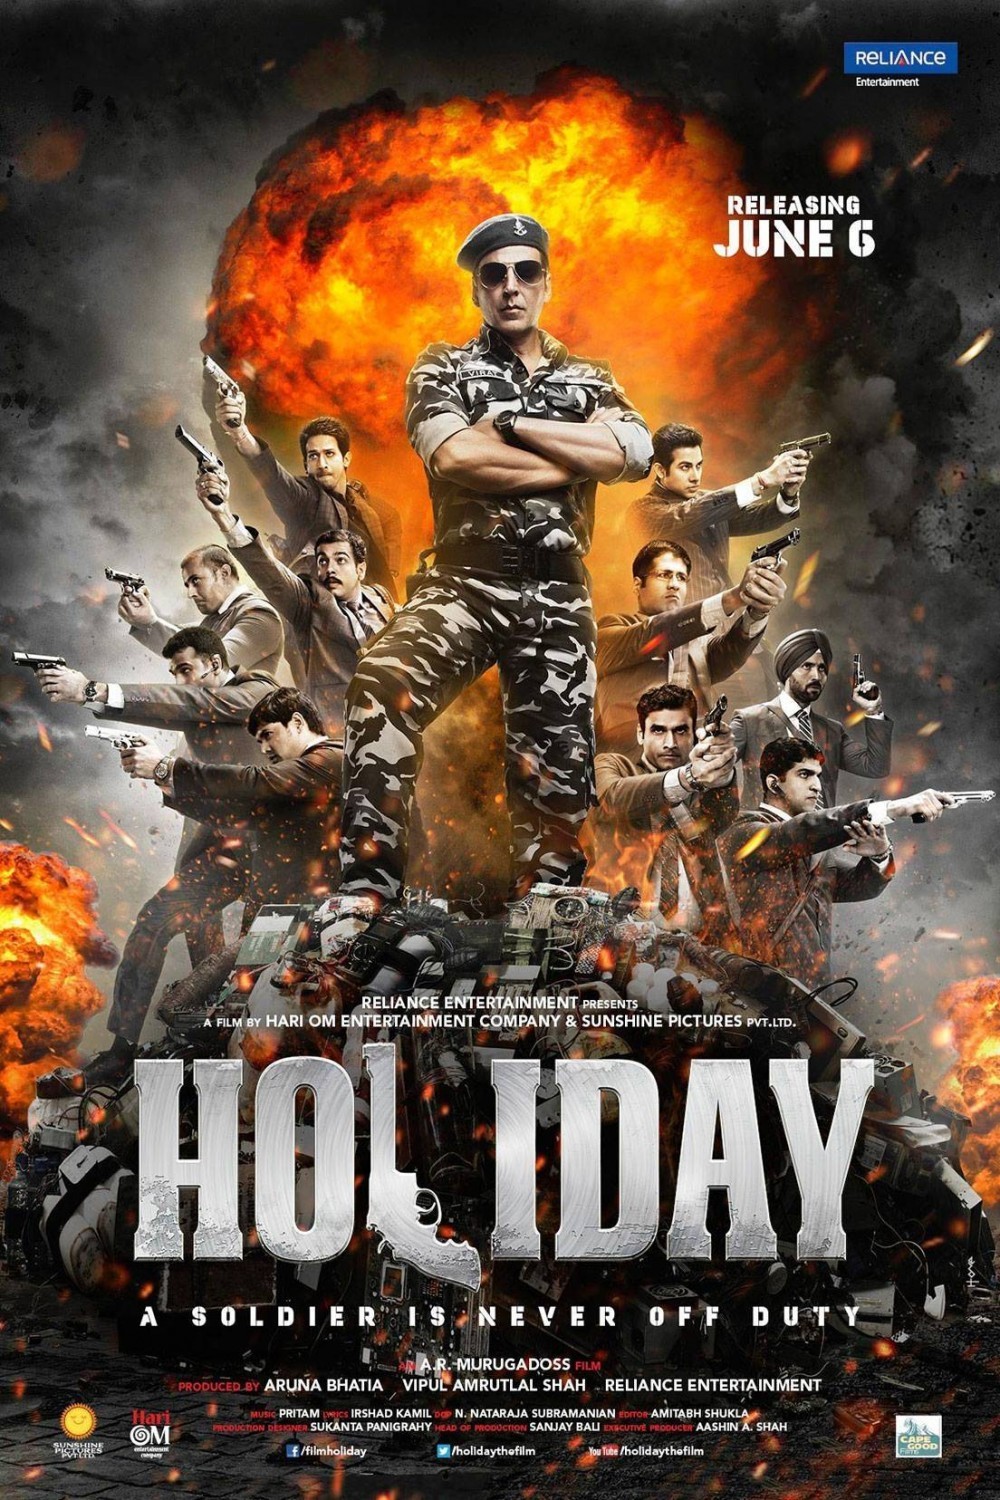 Poster of Reliance Entertainment's Holiday (2014)